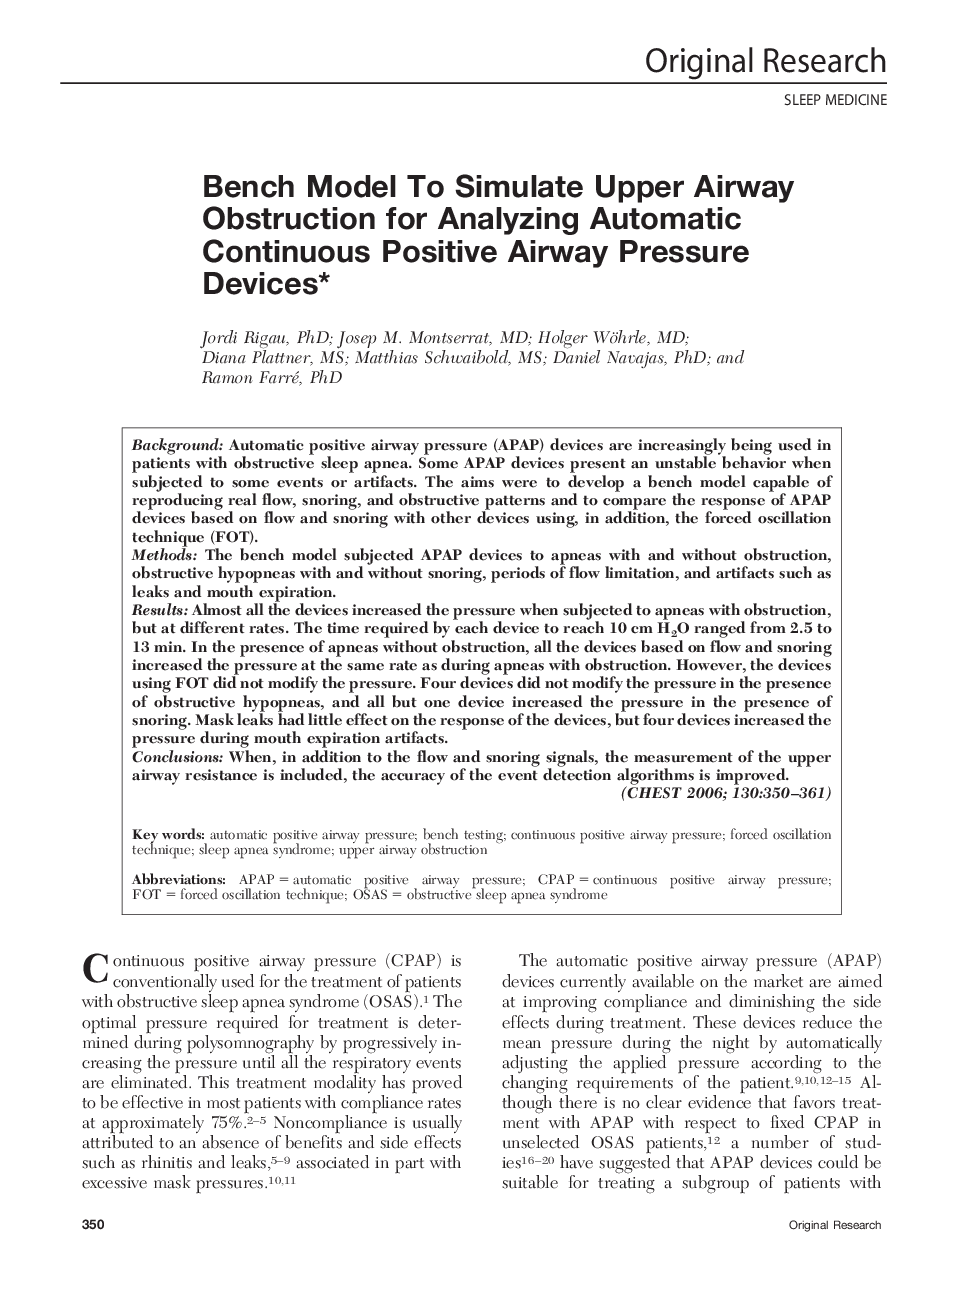 Bench Model To Simulate Upper Airway Obstruction for Analyzing Automatic Continuous Positive Airway Pressure Devices 